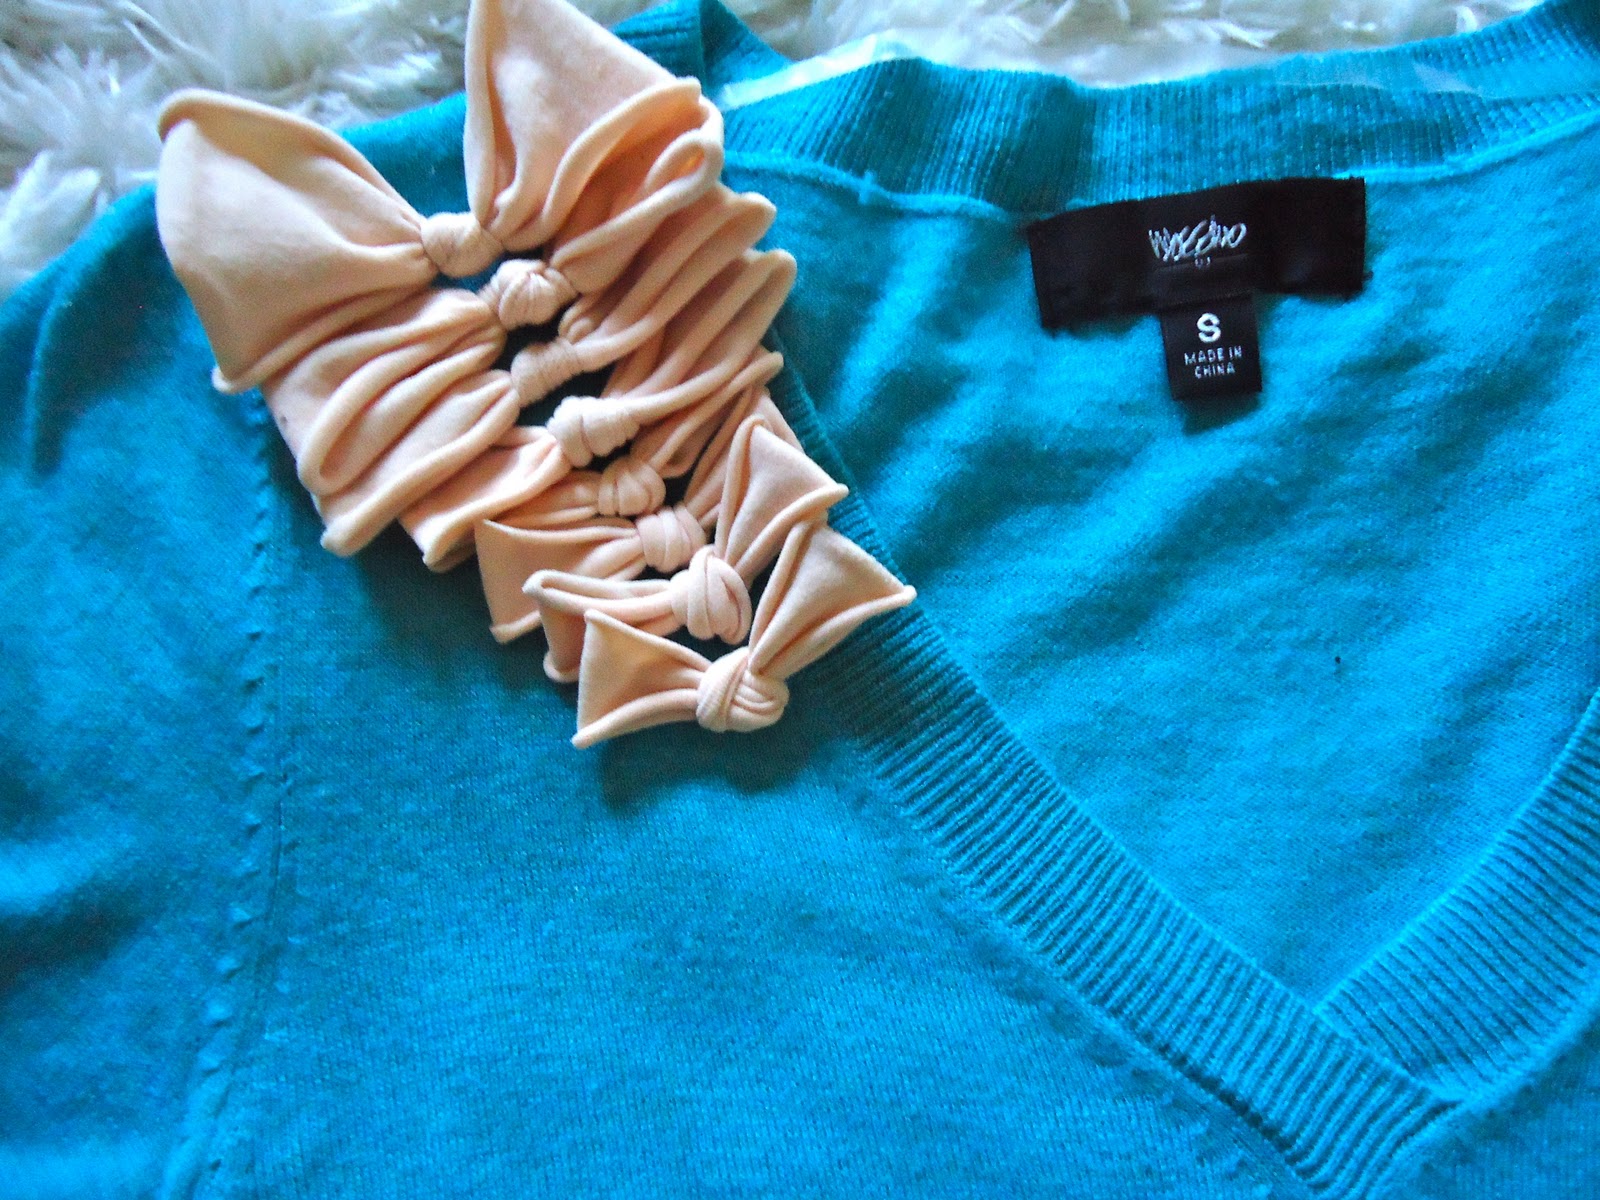 Sweater bows